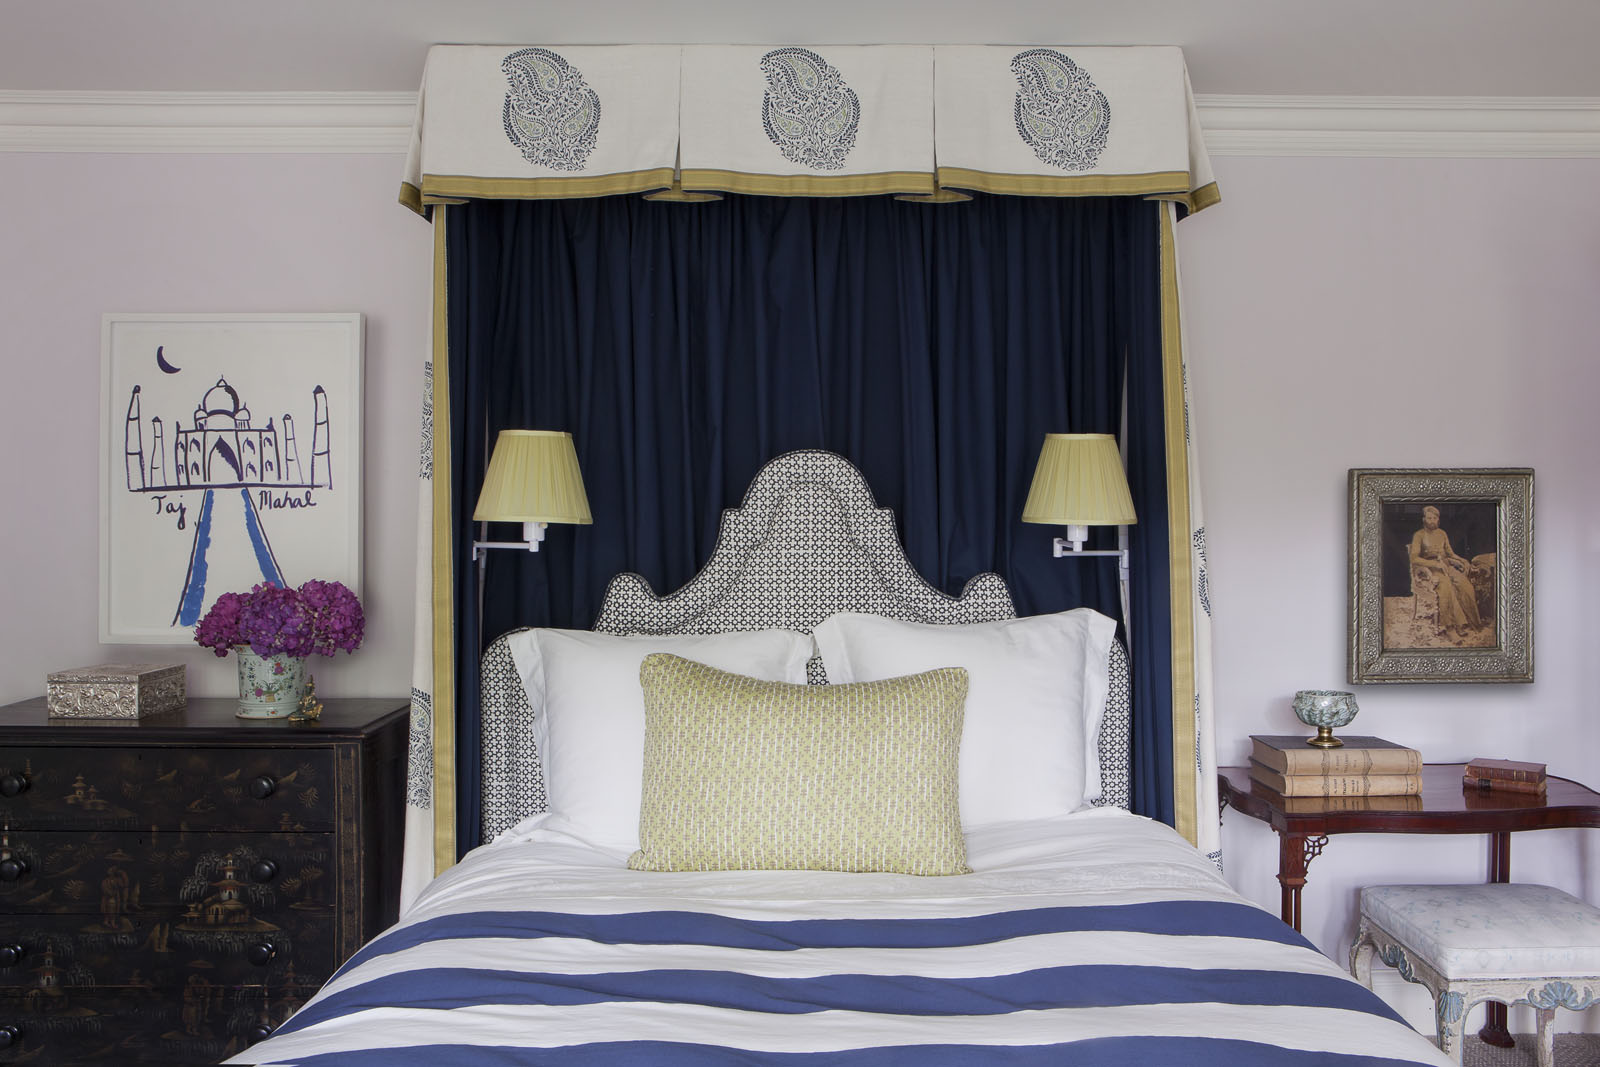  In a guest room, a headboard upholstered in a&nbsp;  Holland &amp; Sherry  textile is framed by bed hangings of&nbsp;  Pintura Studios  &nbsp;and&nbsp;  Loro Piana  &nbsp;fabrics. The sconces are by&nbsp;  Hinson and Co.  , the bedding is by&nbsp;  